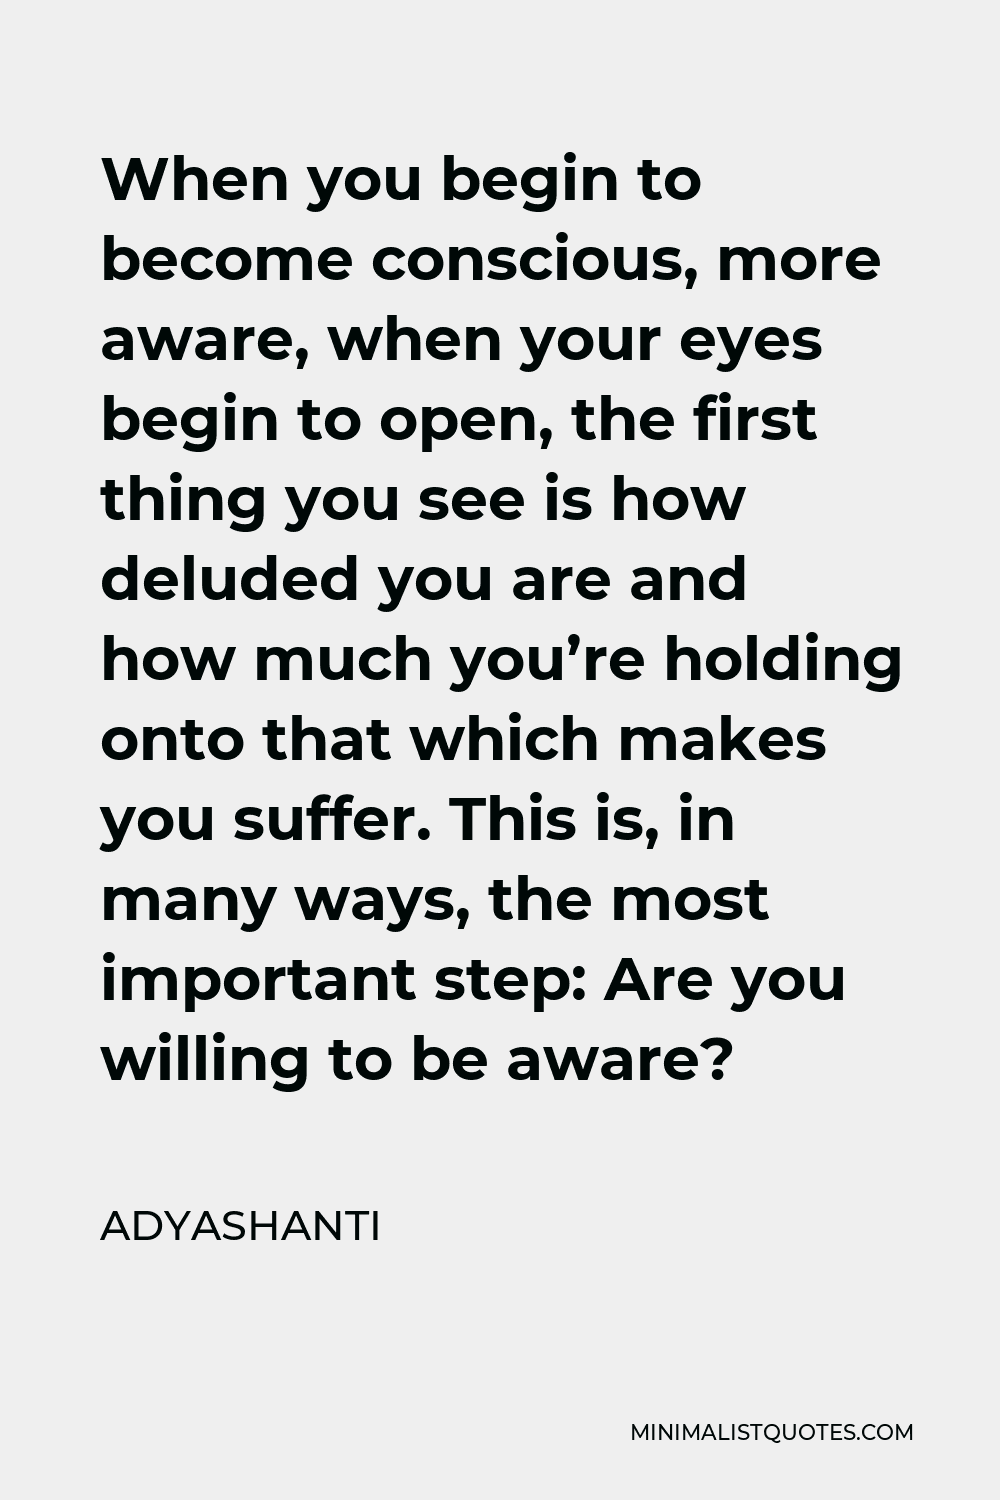 Adyashanti Quote - When you begin to become conscious, more aware, when your eyes begin to open, the first thing you see is how deluded you are and how much you’re holding onto that which makes you suffer. This is, in many ways, the most important step: Are you willing to be aware?